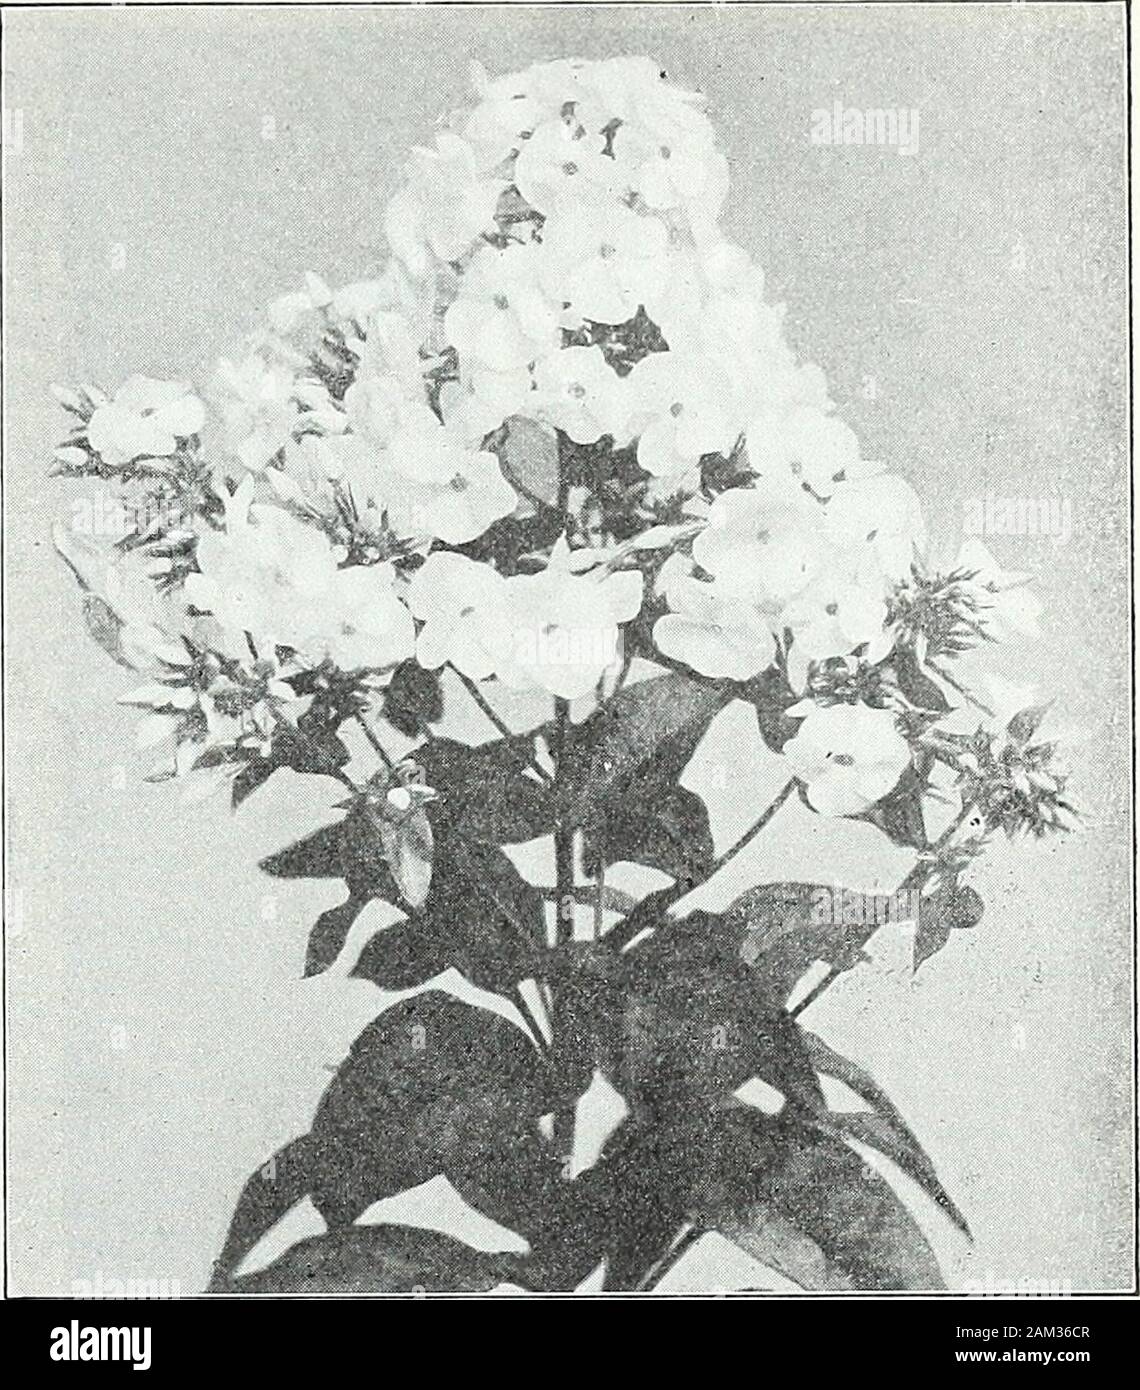 Farquhar's garden annual : 1922 . Hardy Garden Phlox. PHLOXES. STANDARD VARIETIES.—Cow^inued.30 Cts. each; $2.50 per doz.; $15.00 per 100. Hodur. Lilac-rose, shading to white in the centre. La Cygne. Pure white, splendid spike: late. La Vogue. Clear silvery-rose. Mrs. Jenkins. Pure white, fine for massing; large panicles; early. Pantheon. Brilliant rose; an effective variety. Sunshine. Salmon-rose. Fine deep shade. Von Goethe. Richsalmon-ibse. PHLOX amcena. A charming dwarf variety, forming a carpet of foliage, covered in May and June with a Doz. :00mass of lavender pink flowers. 9 in. .S2.50 Stock Photo